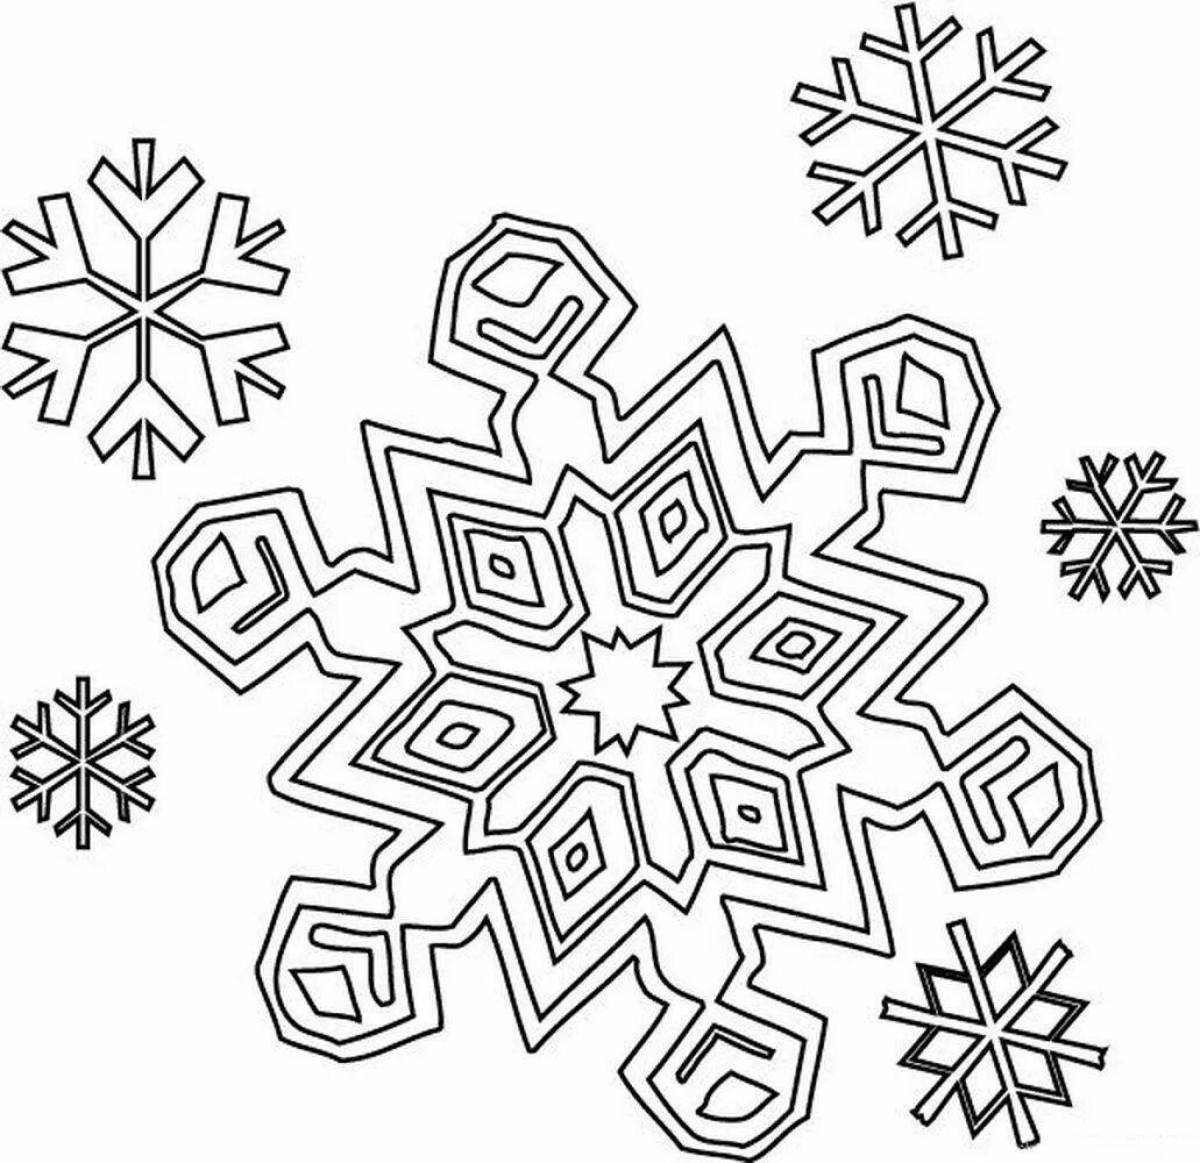 Snowflake bright coloring for children 4-5 years old